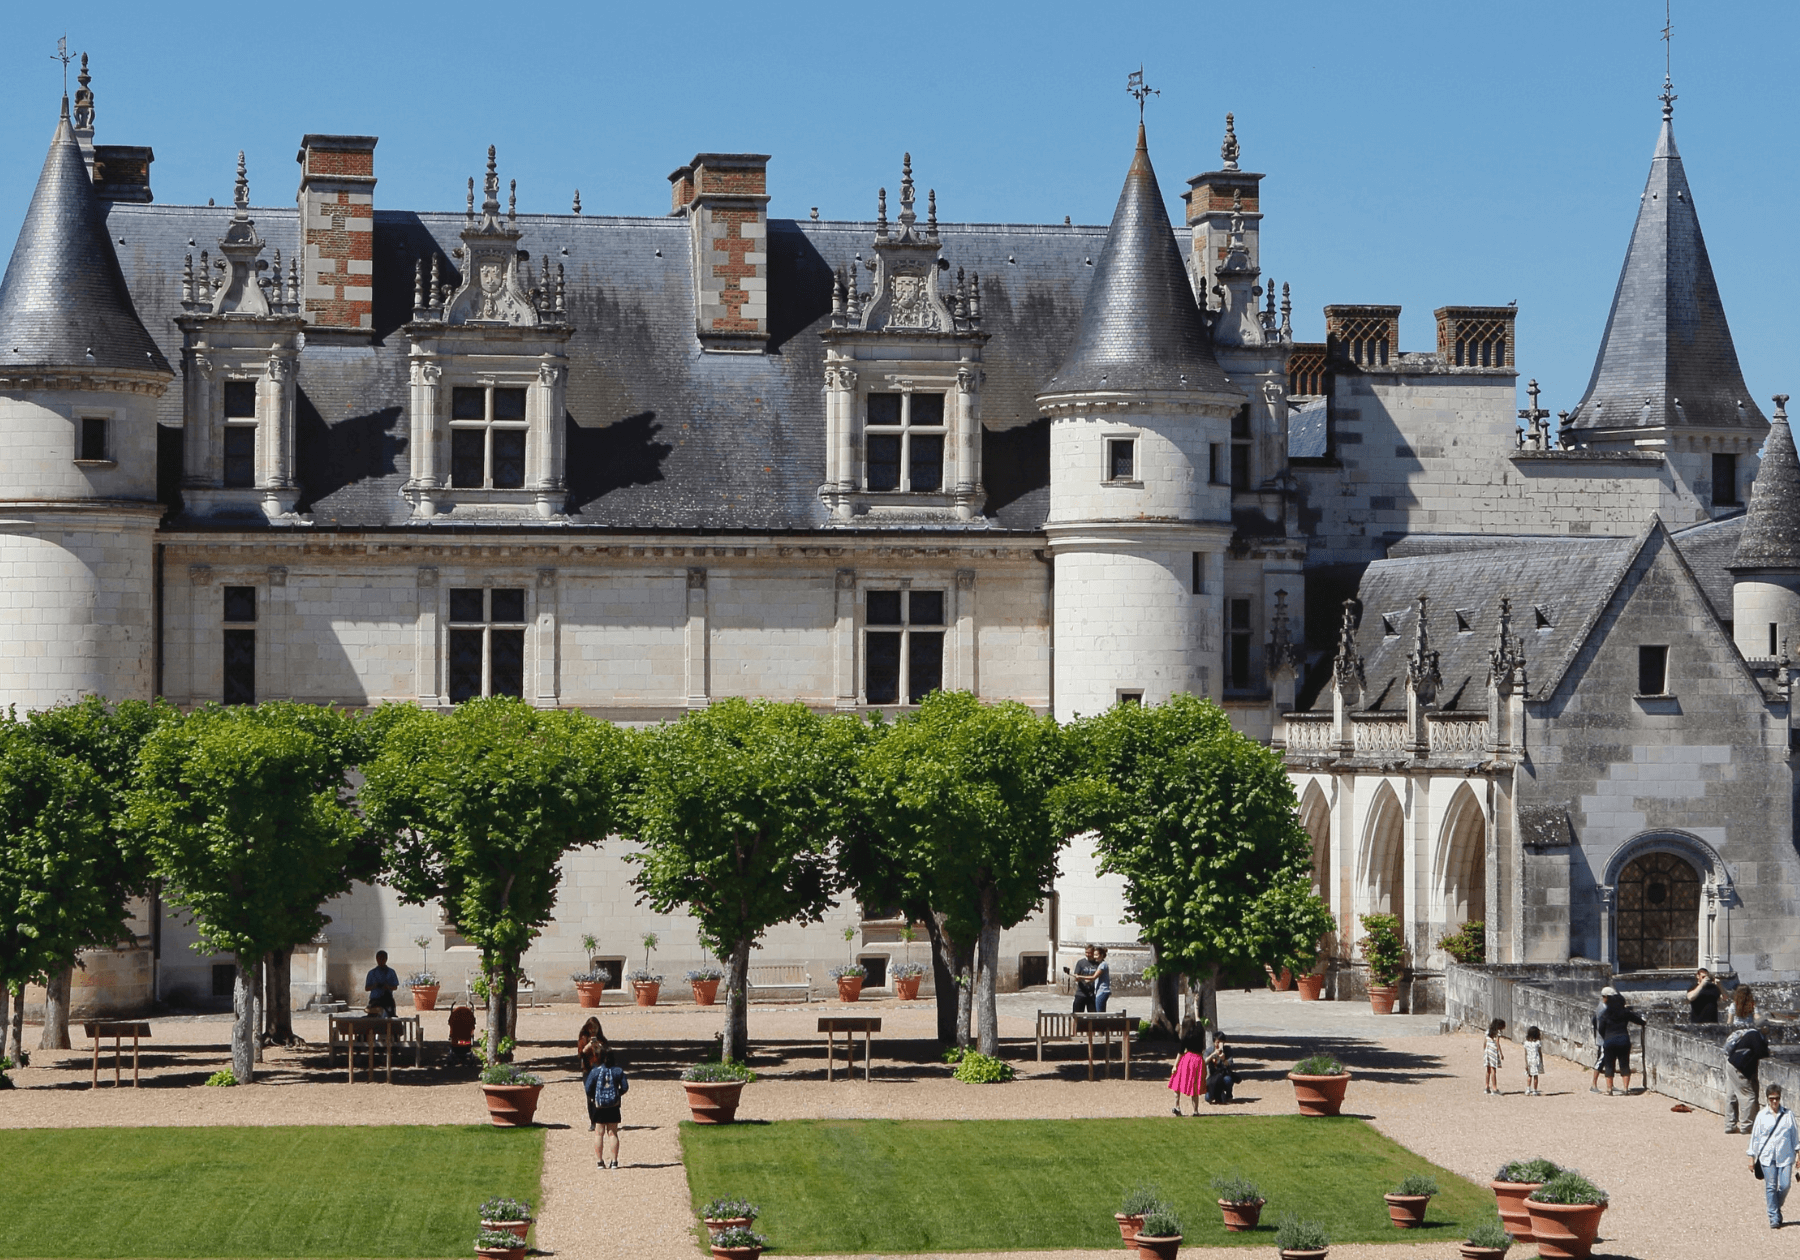 Chateau Amboise in the Loire Valley